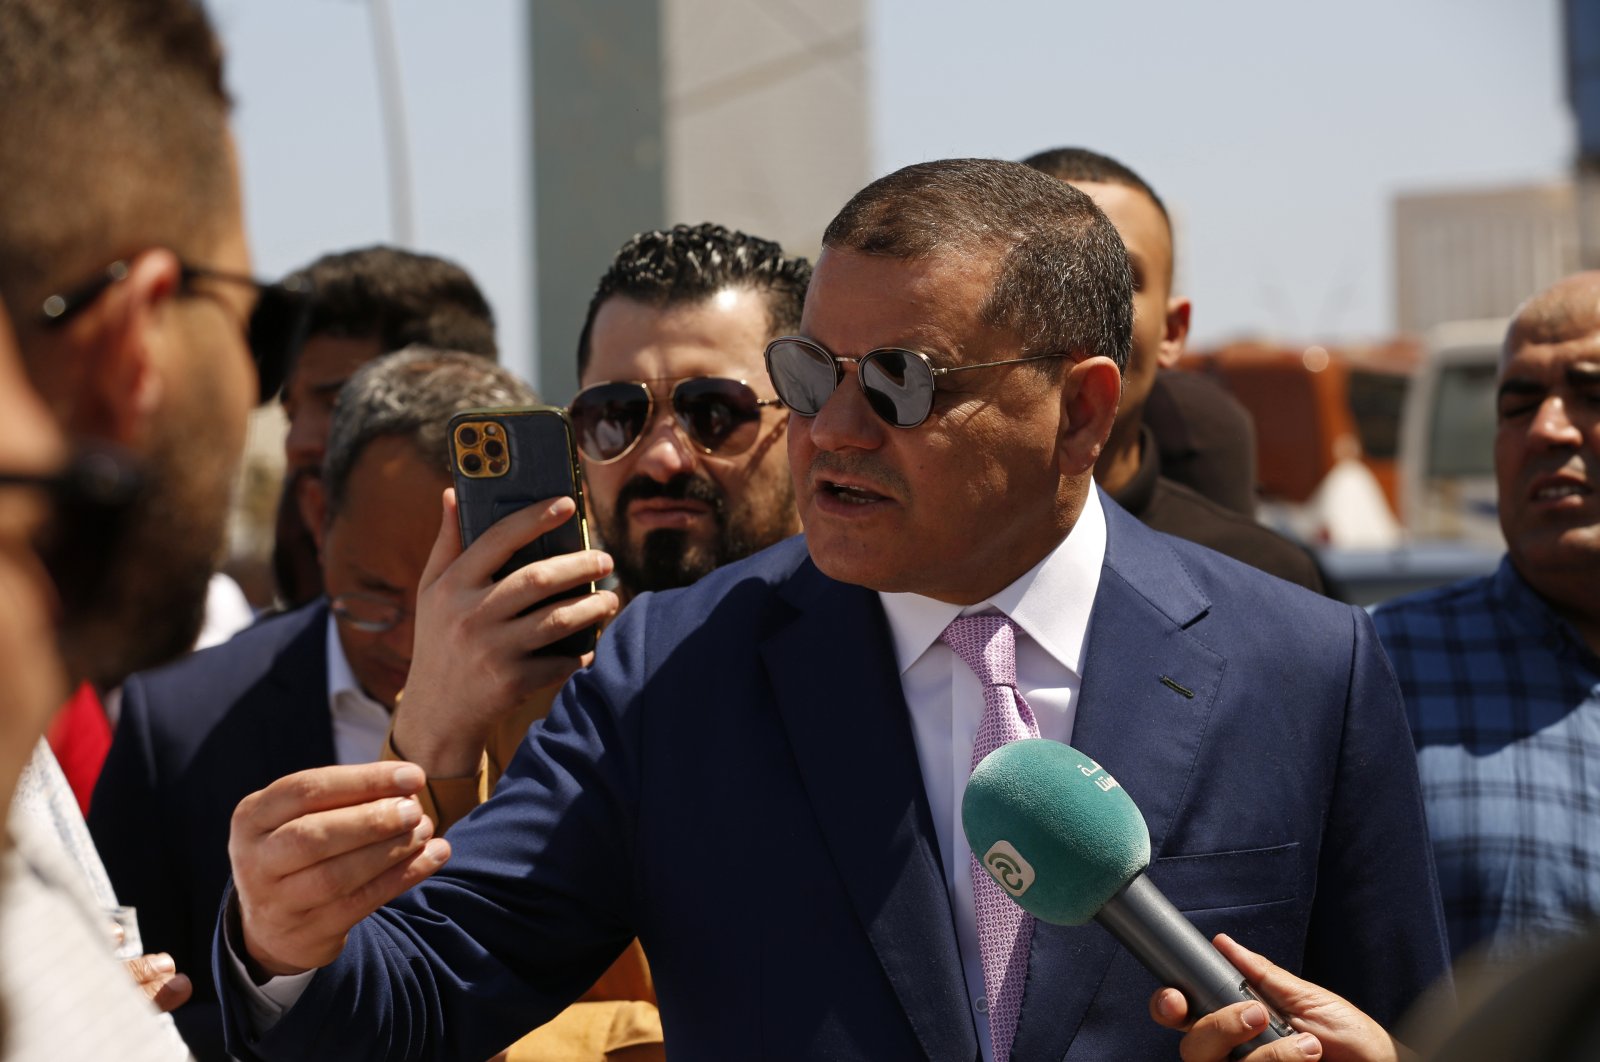 Abdul Hamid Dbeibah, one of Libya’s two rival prime ministers, center, visits a Tripoli neighborhood after competing militias fought there, in Tripoli, Libya, Tuesday, May 17, 2022. (AP File Photo)